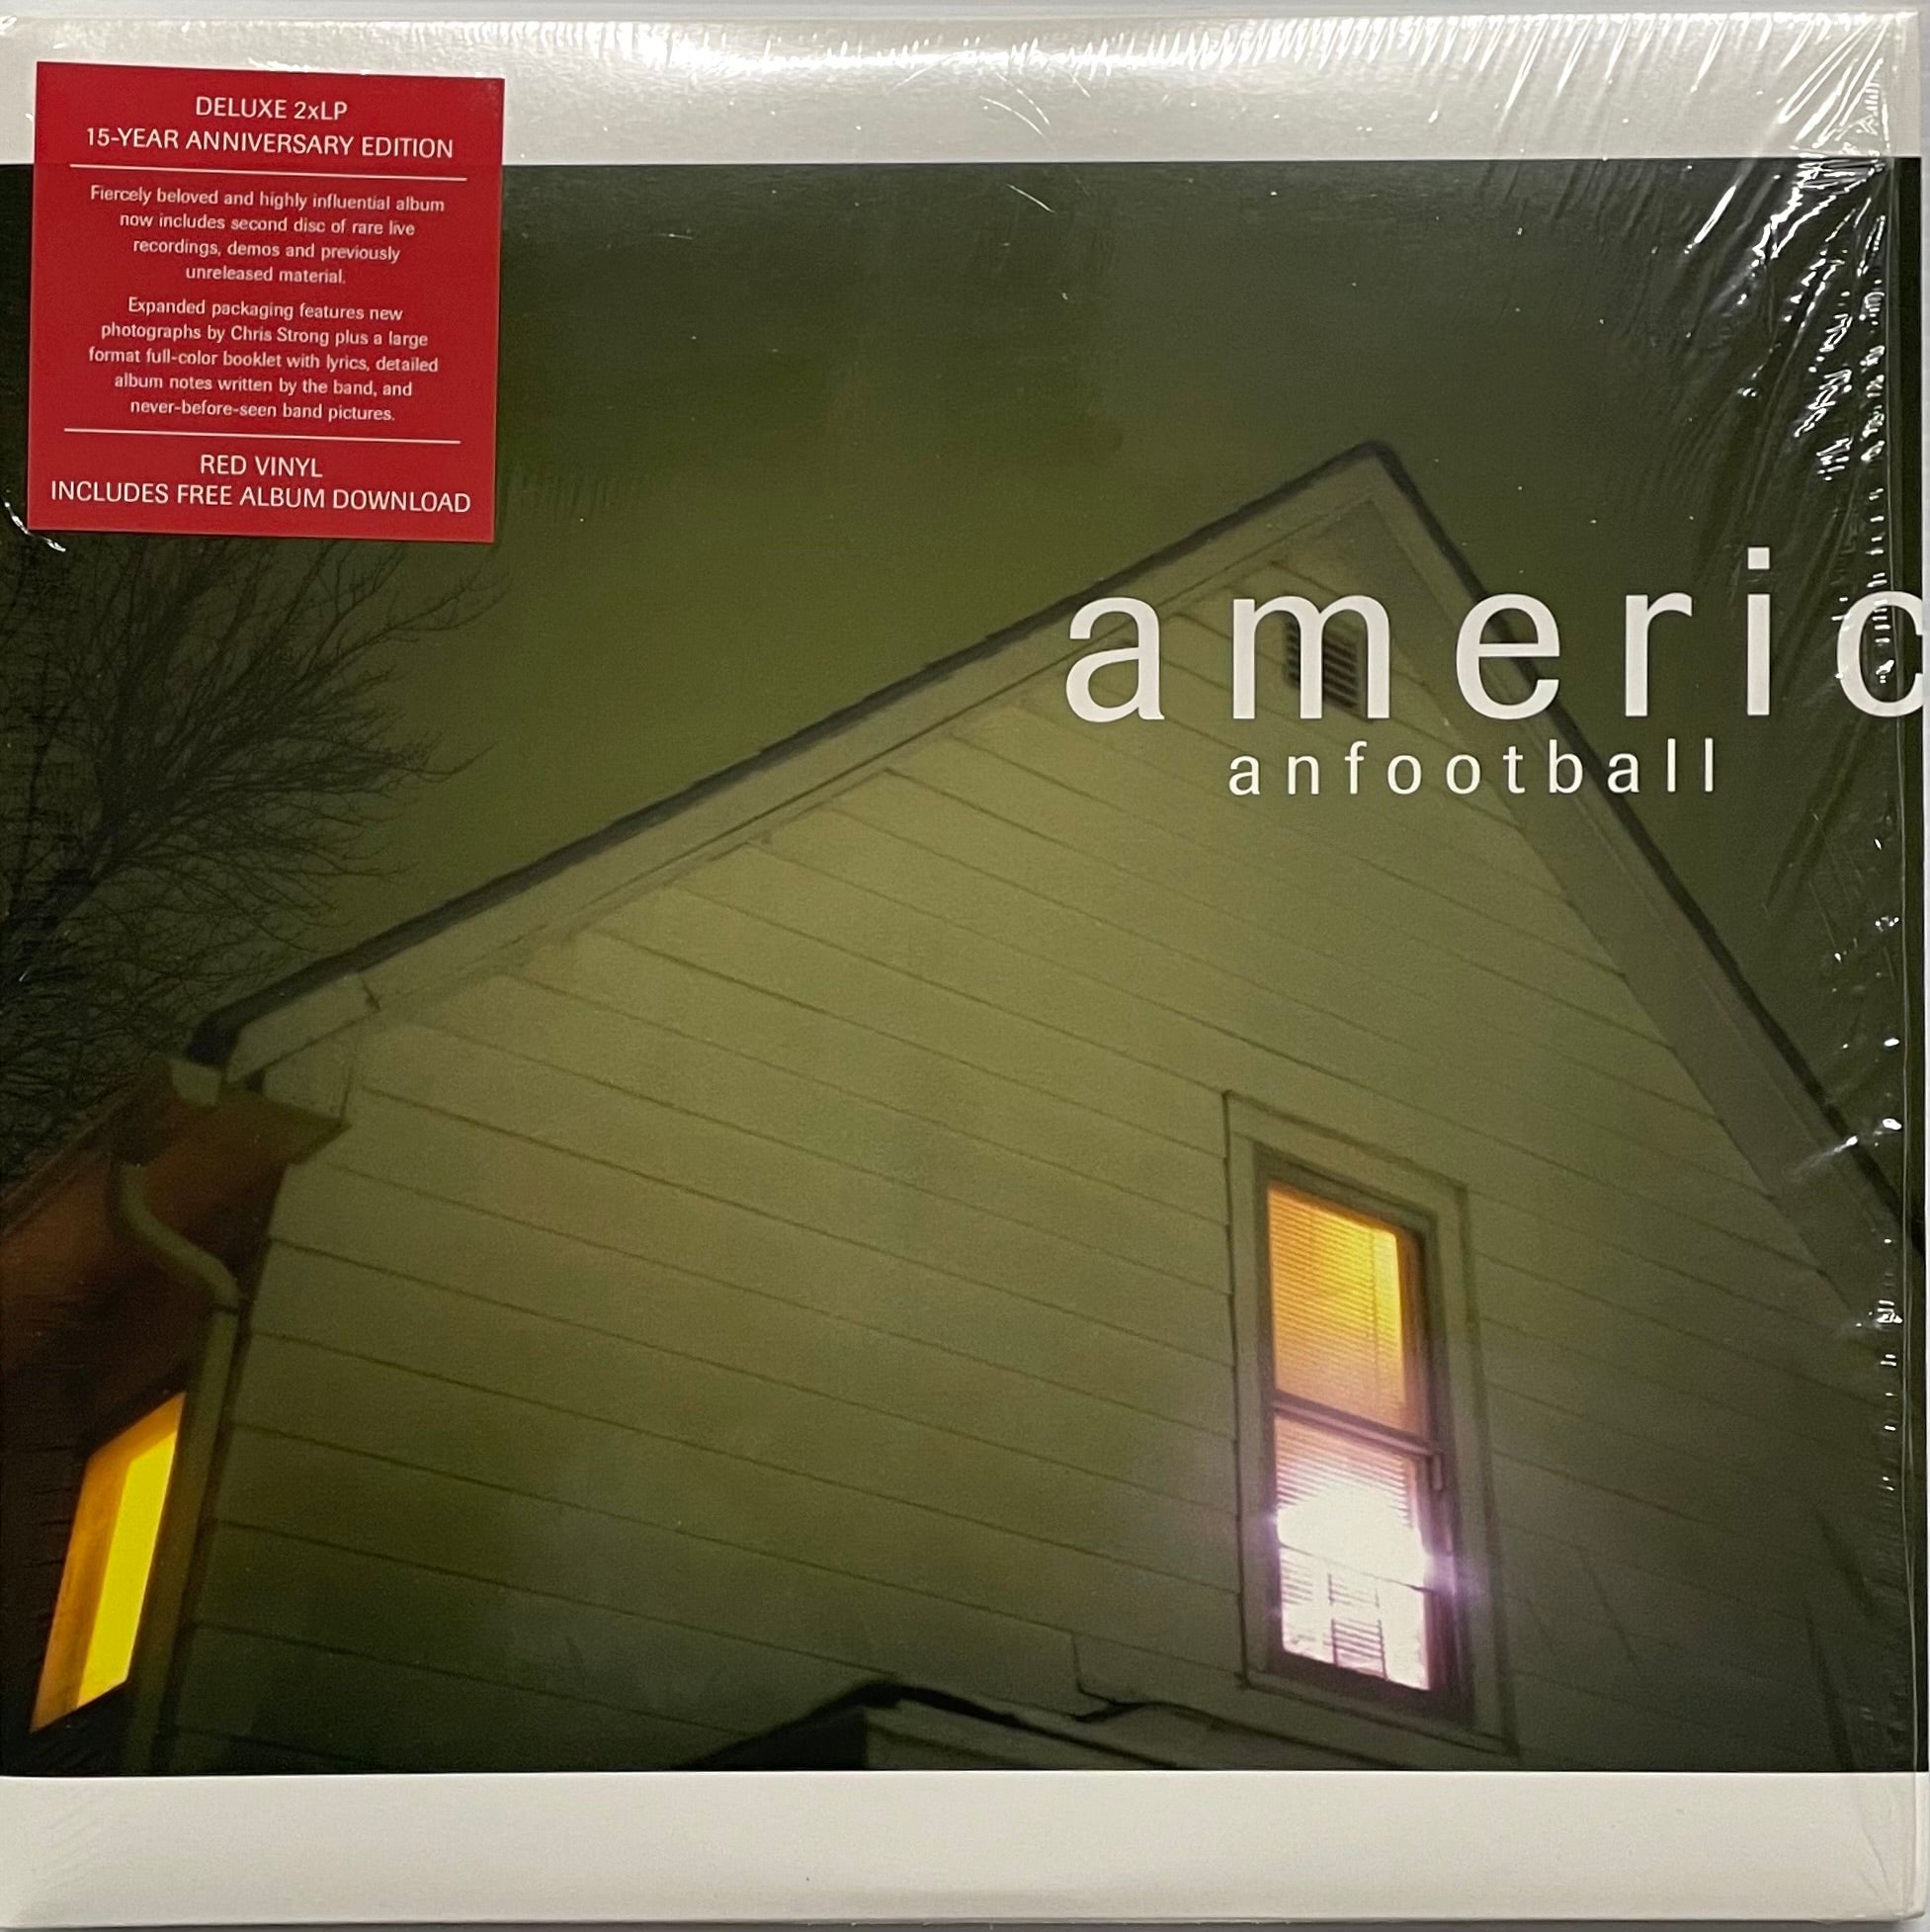 American Football "s/t" Red Vinyl 15 Year Anniversary Edition DELUXE